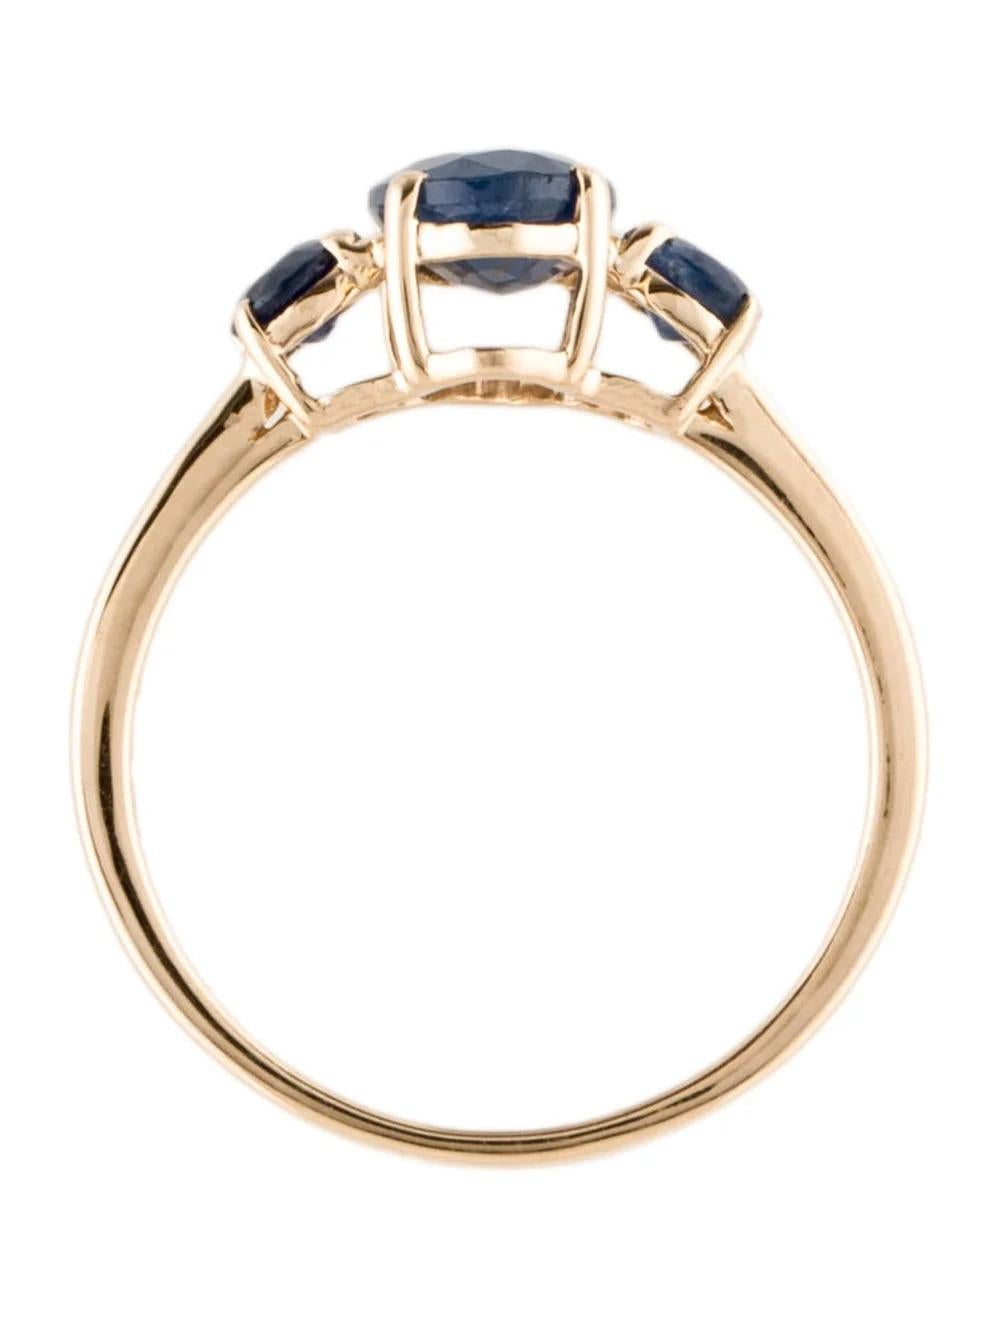 Women's 14K 1.27ct Sapphire Cocktail Ring Size 6.75: Yellow Gold Statement Jewelry For Sale